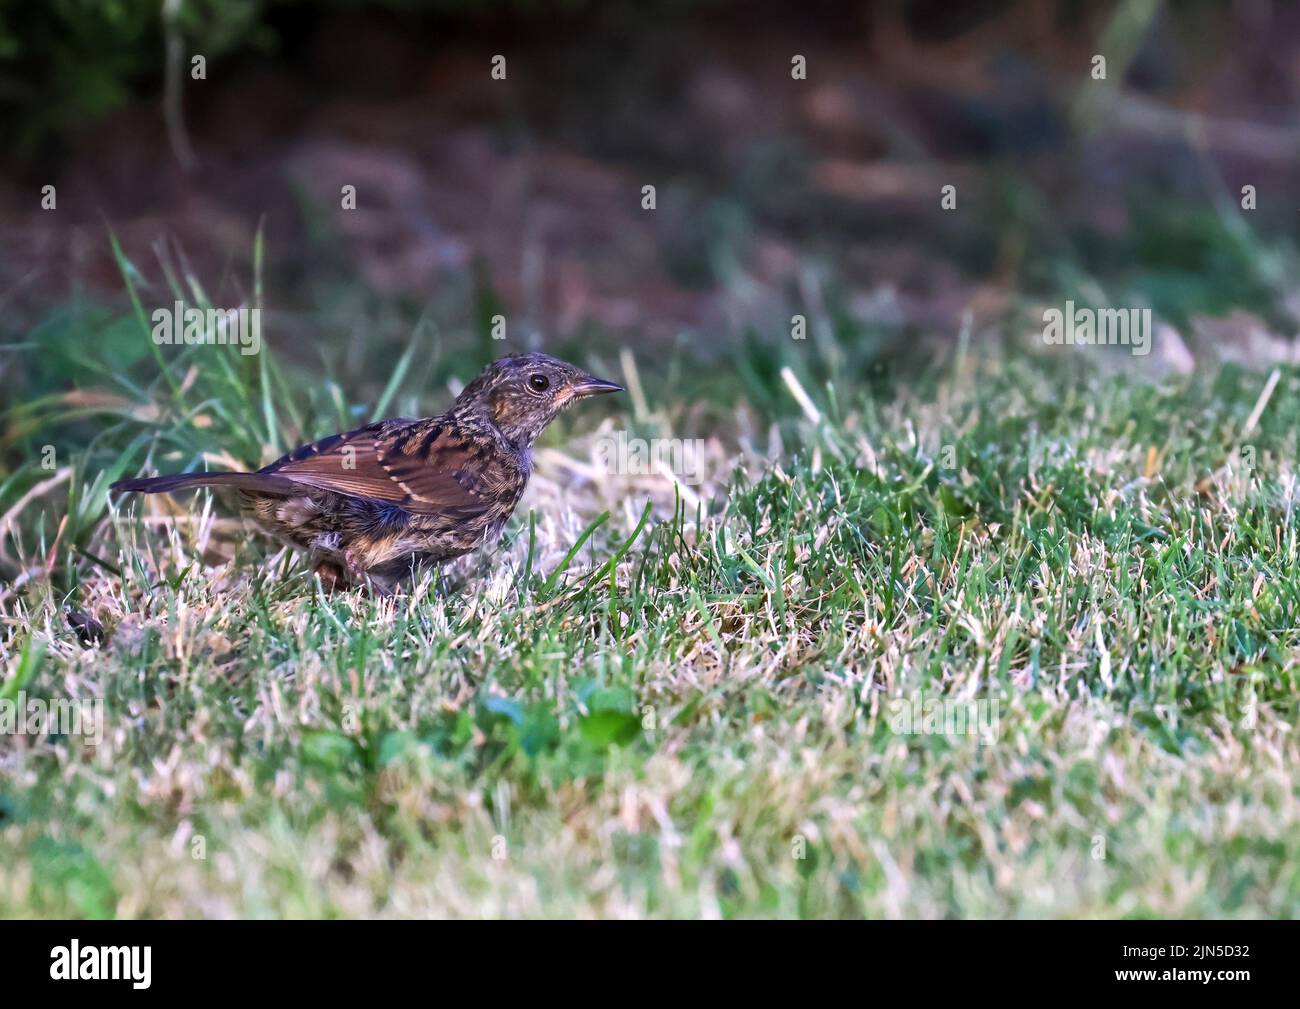 The Dunnock 'Prunella modularis' standing on grass in garden . Small bird with brown and grey feathers in shade of trees. Dublin, Ireland Stock Photo